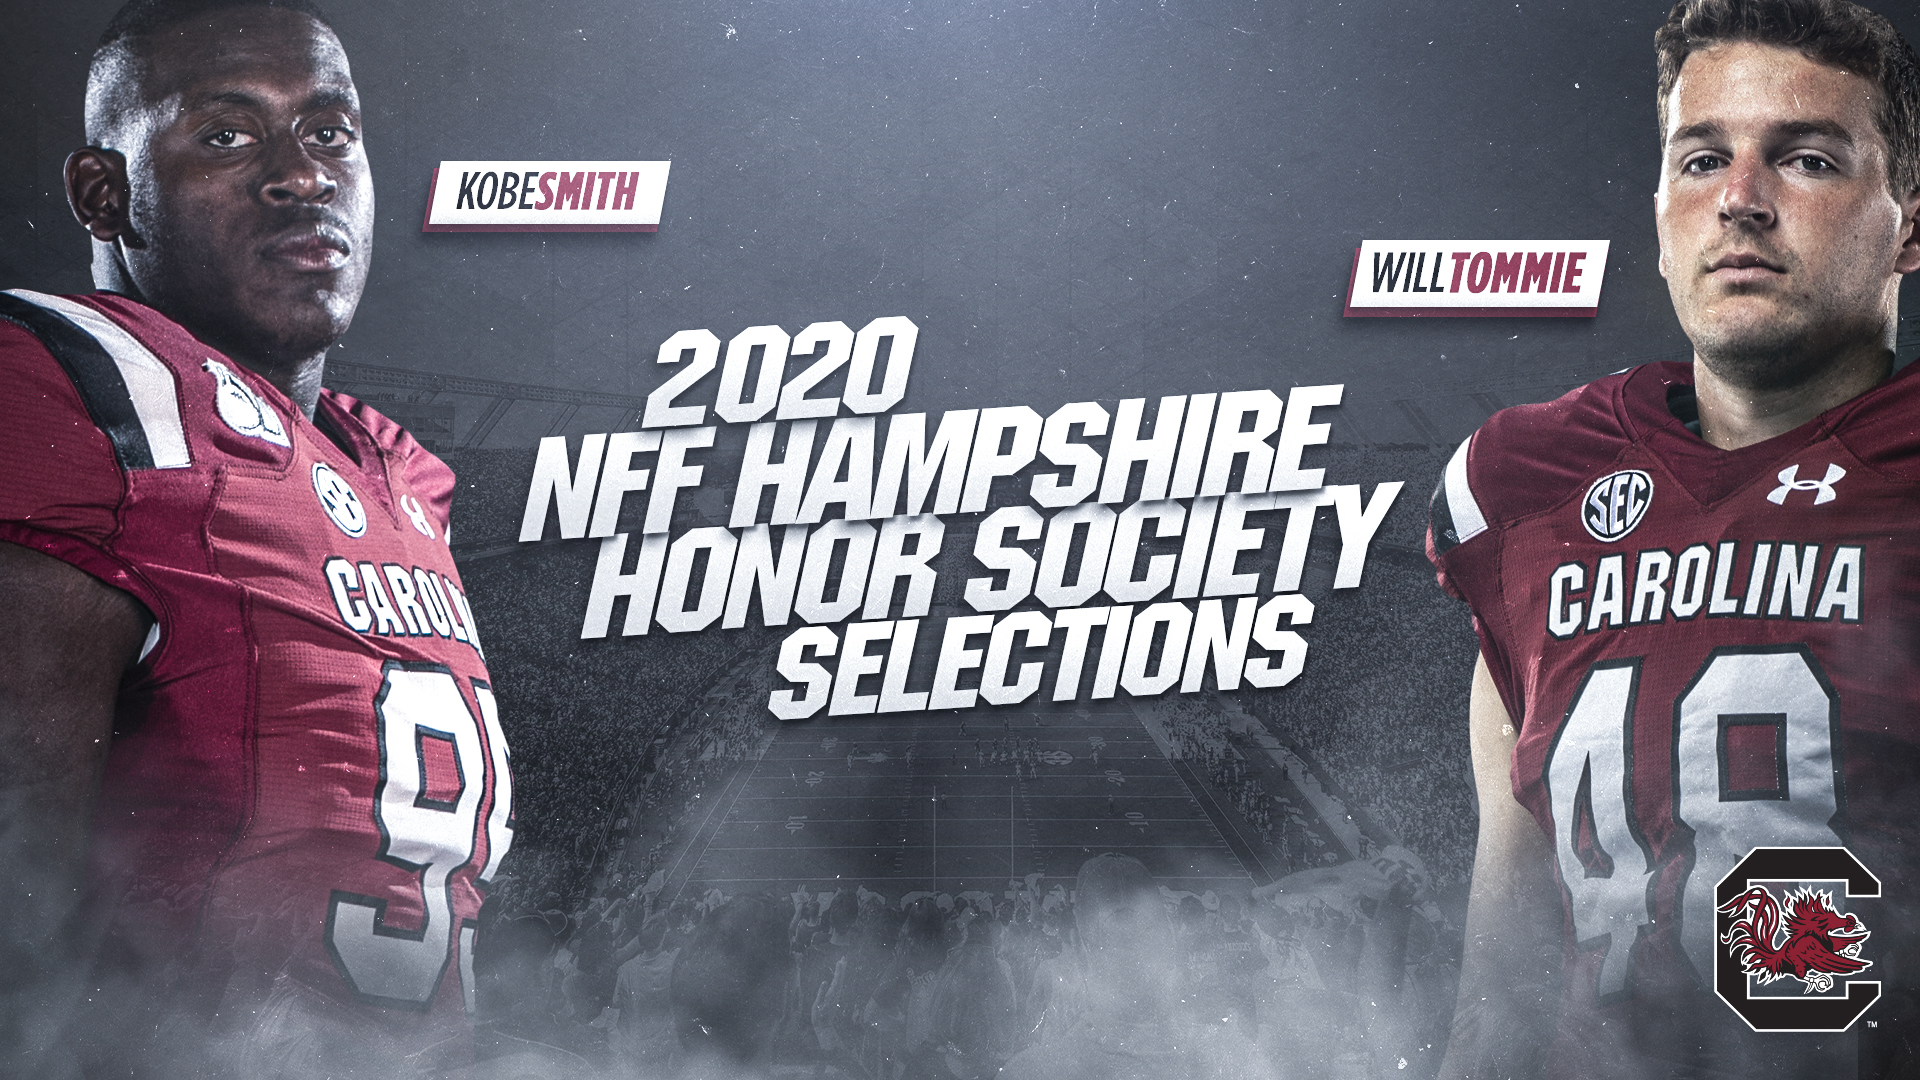 Smith and Tommie Named Hampshire Honor Society Members